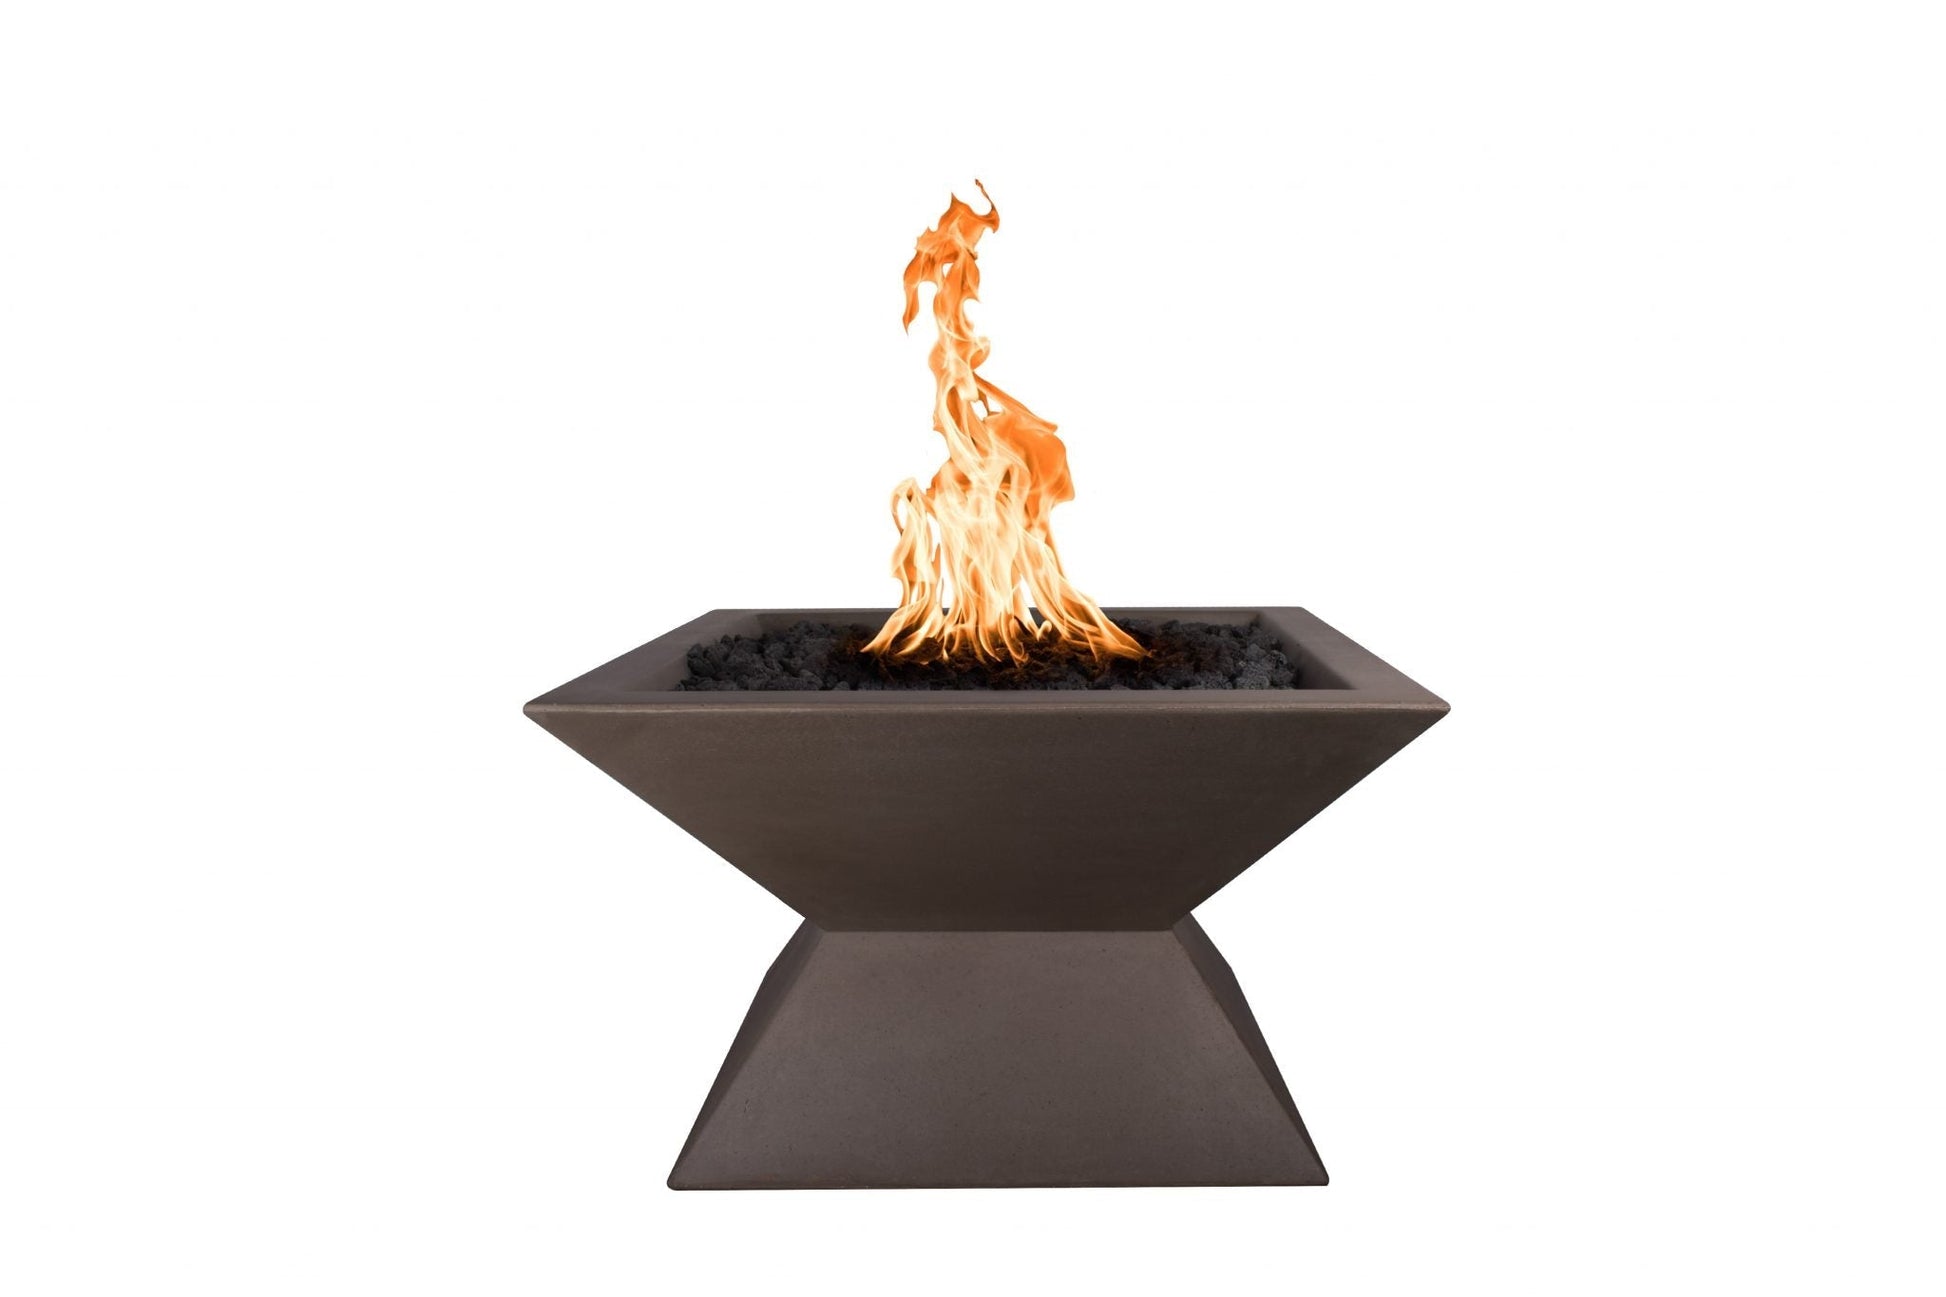 The Outdoor Plus Square Uxmal 30" Metallic Copper GFRC Concrete Natural Gas Fire Pit with 12V Electronic Ignition